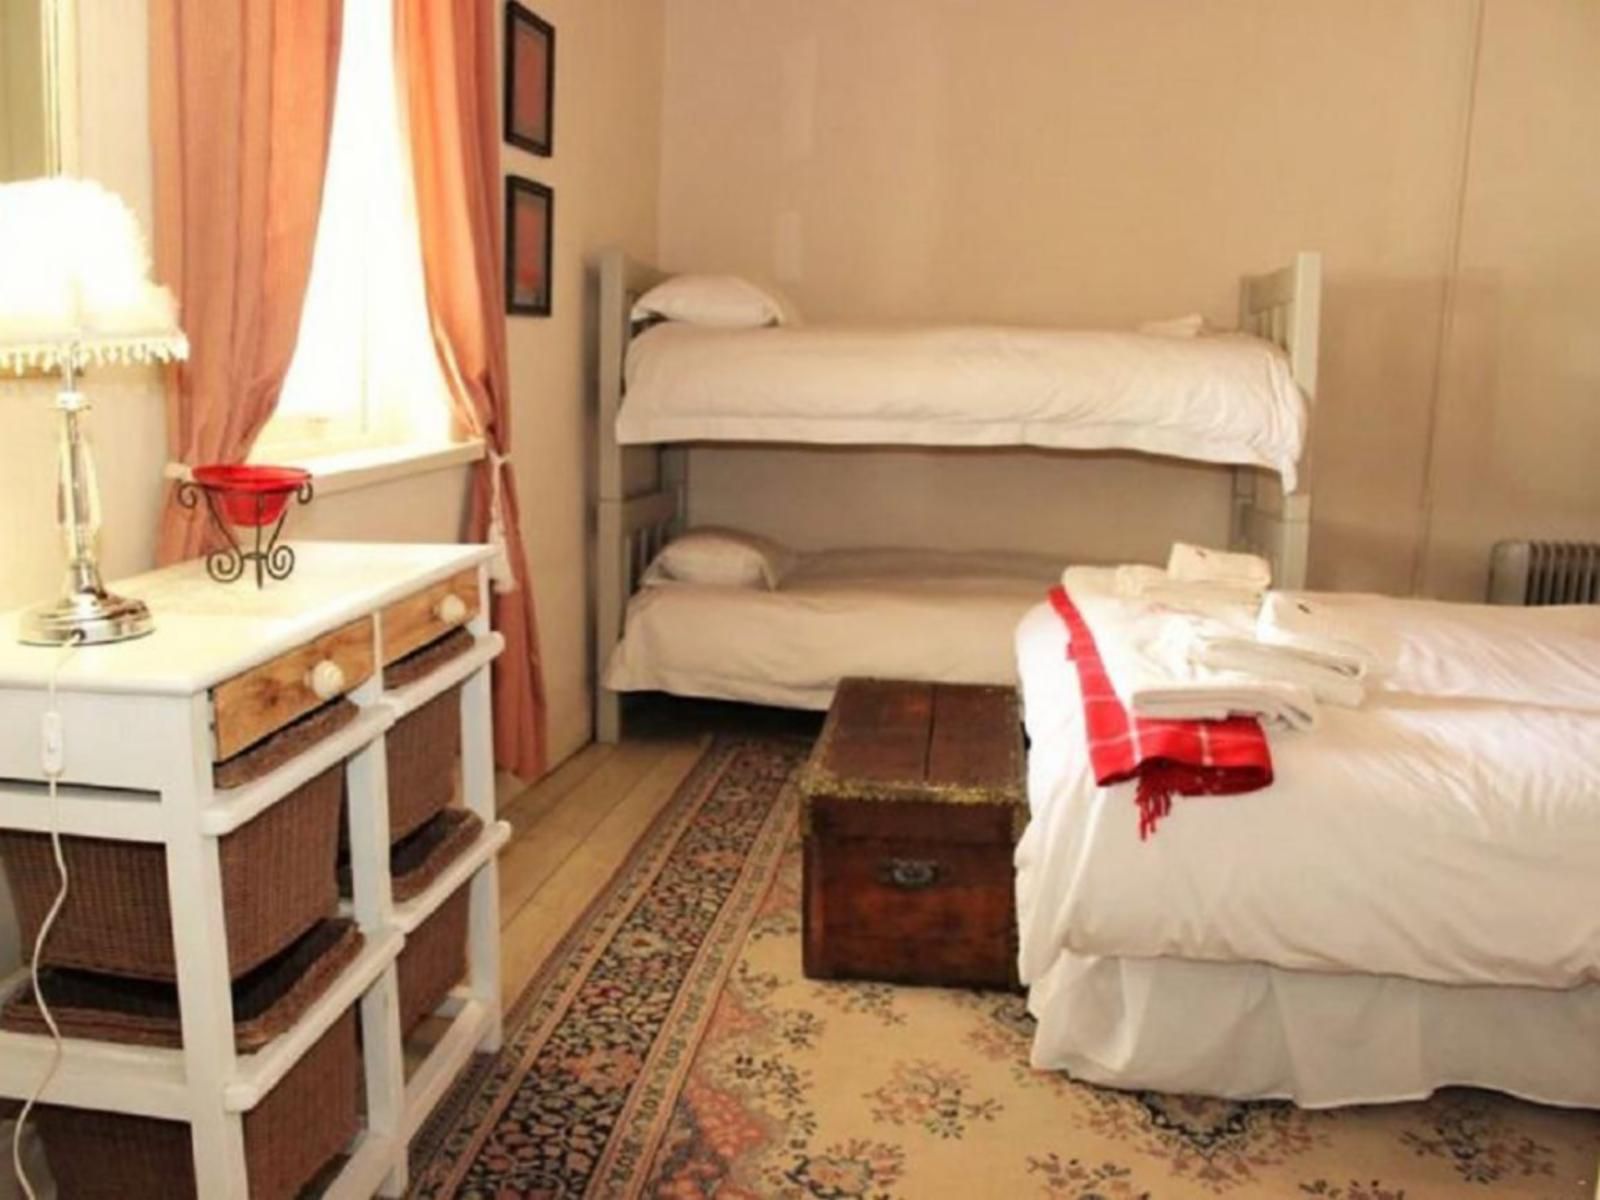 Boorgat Sutherland Northern Cape South Africa Bedroom